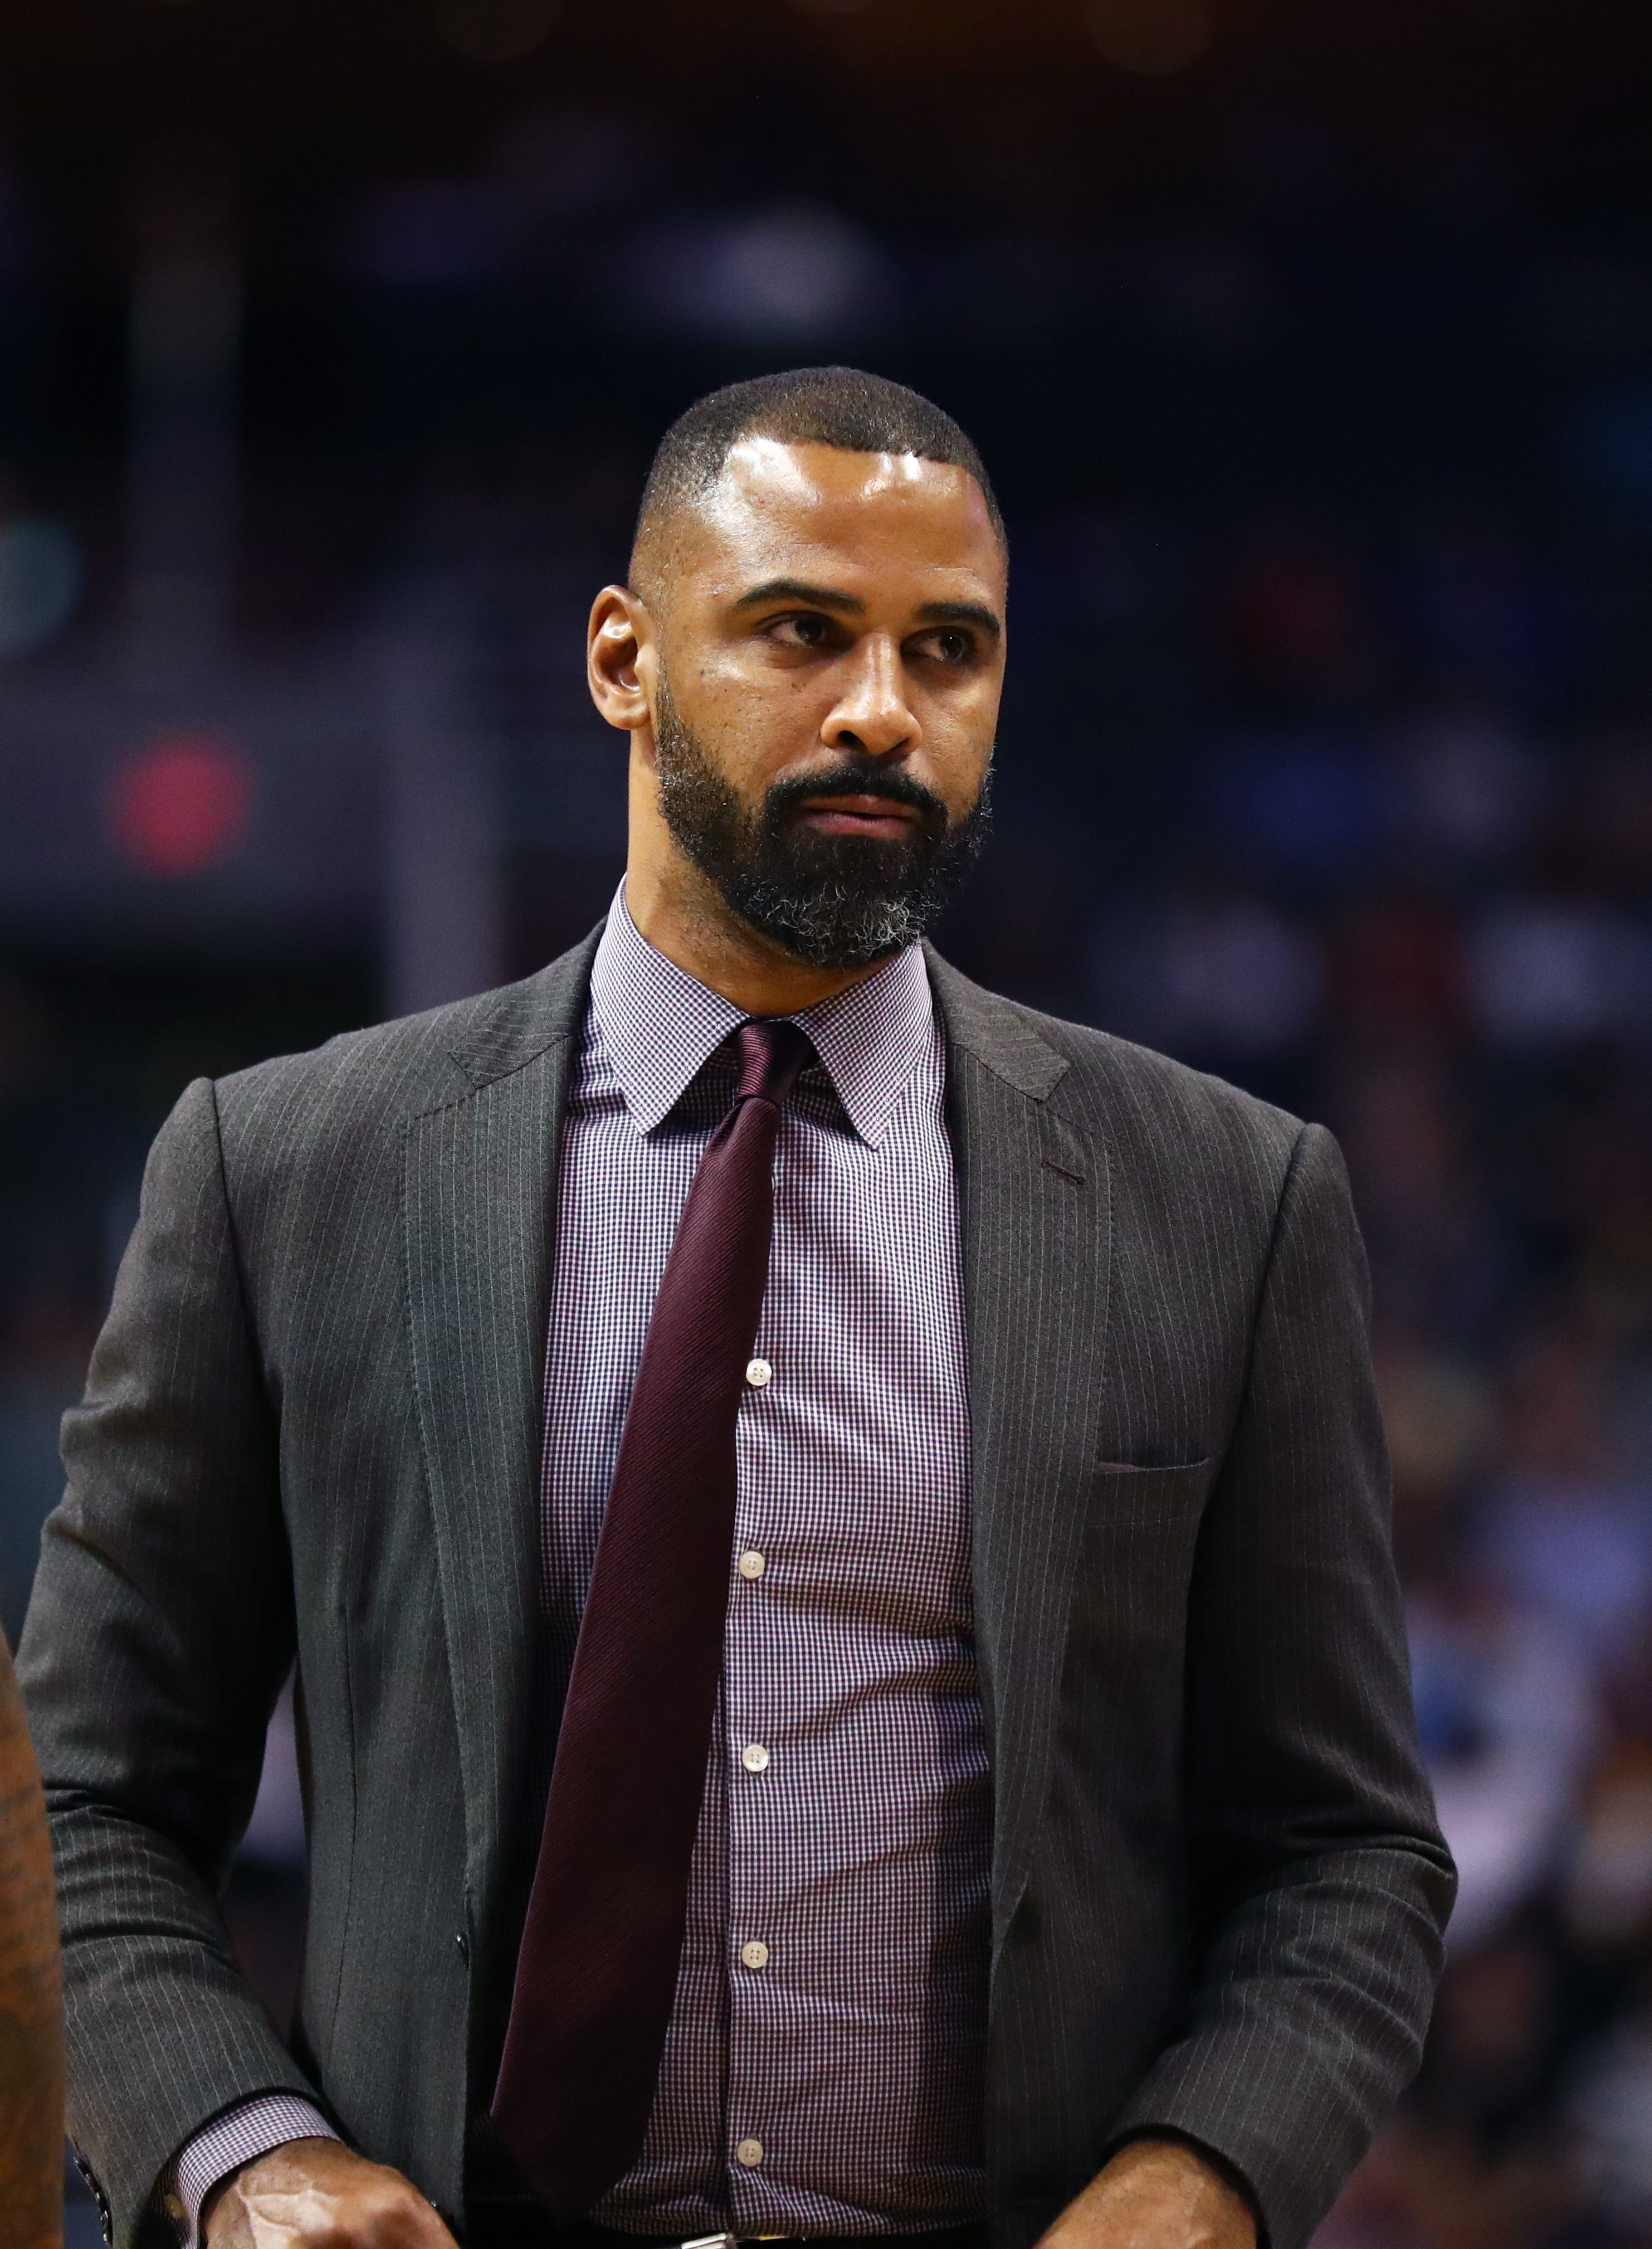 Celtics coach Ime Udoka steps away from the team after contracting COVID